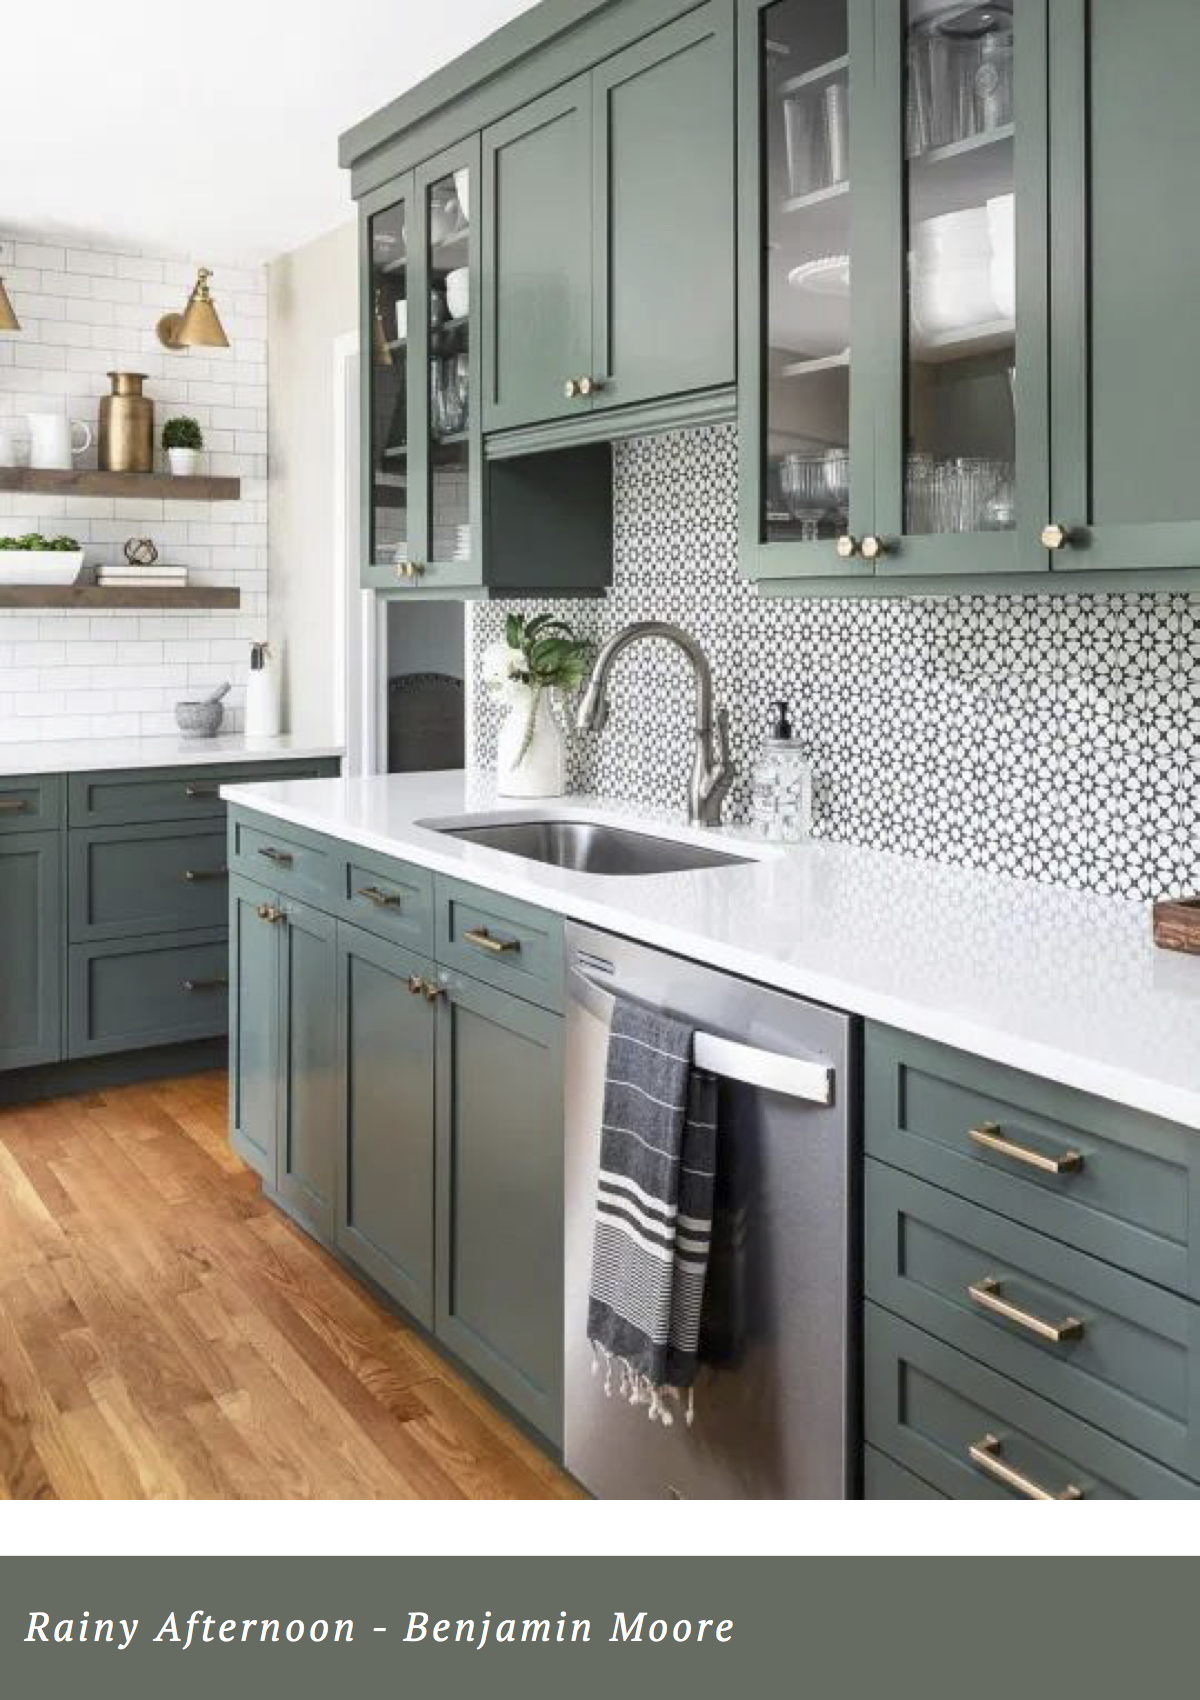 Kitchen Series Going Green In Honor, 5 Day Cabinets Complaints